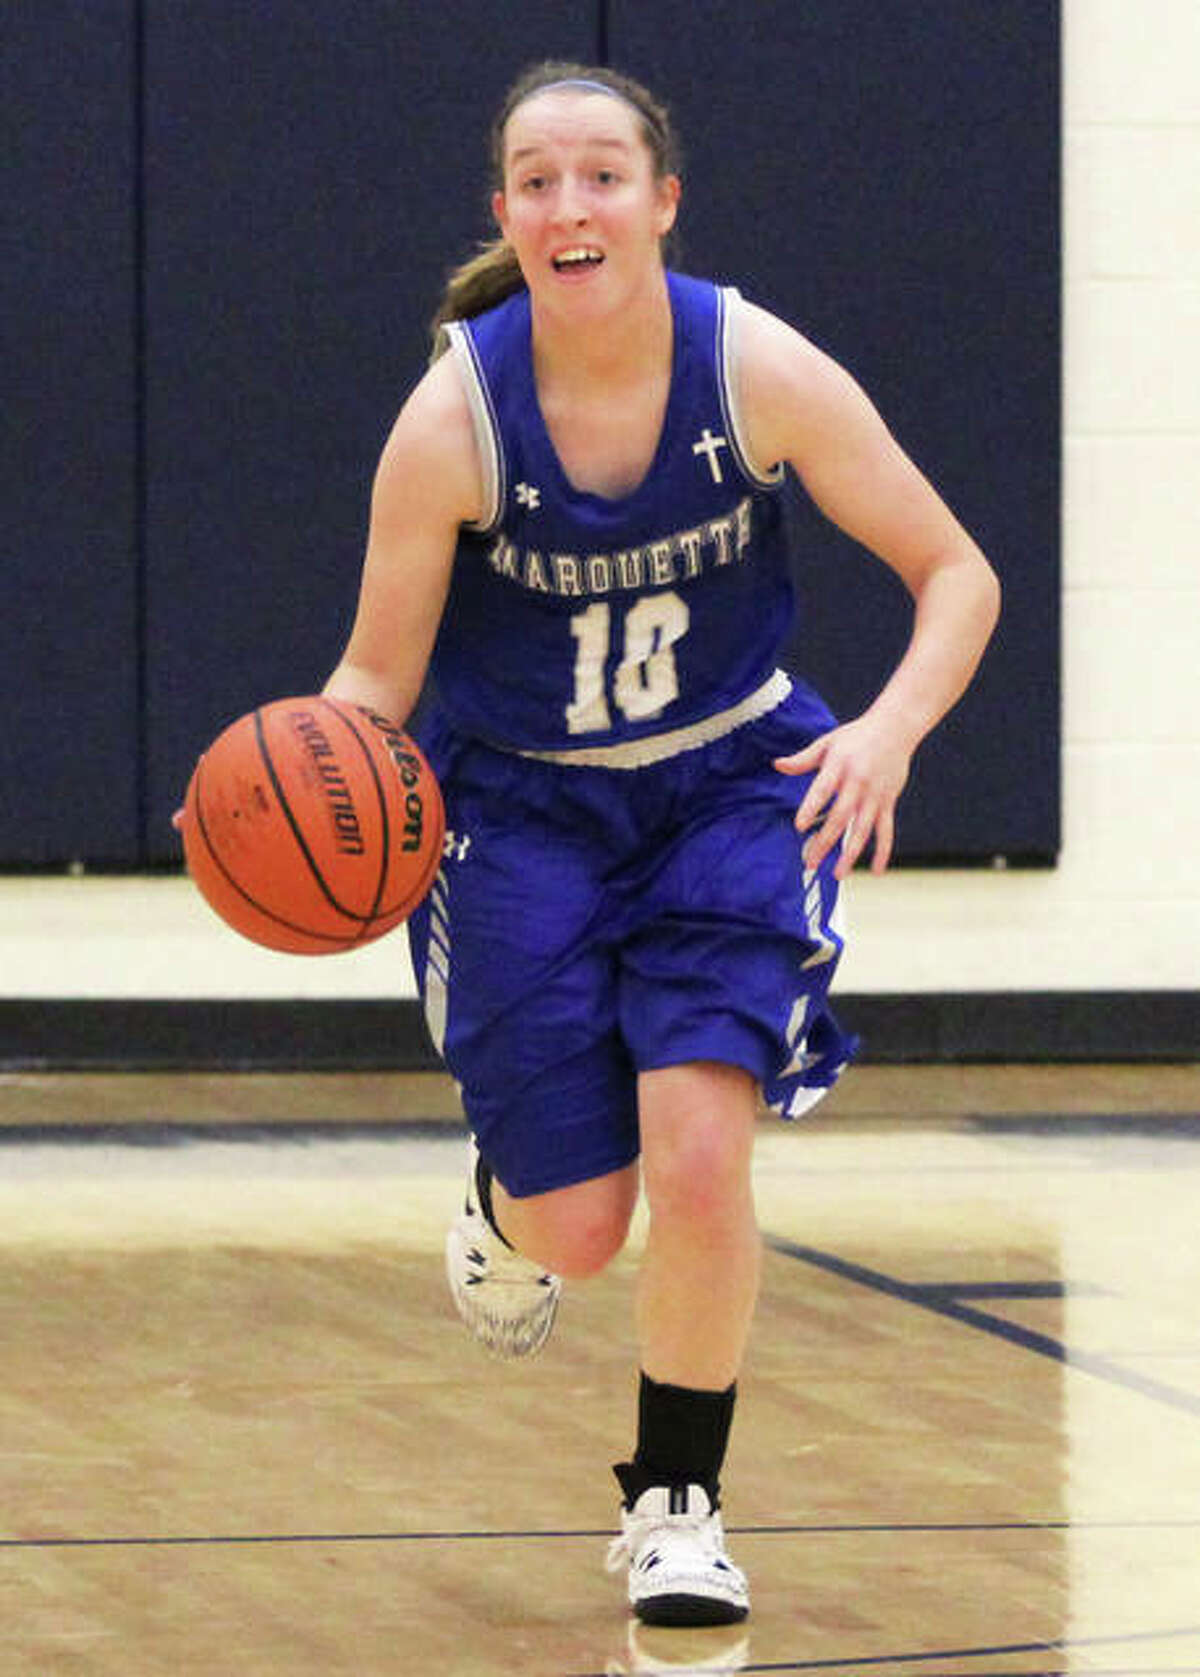 Marquette Catholic’s Emma Nicholson hit a career-high four 3-pointers to match her career high with 13 points in the Explorers victory over Litchfield on Thursday night in Alton.